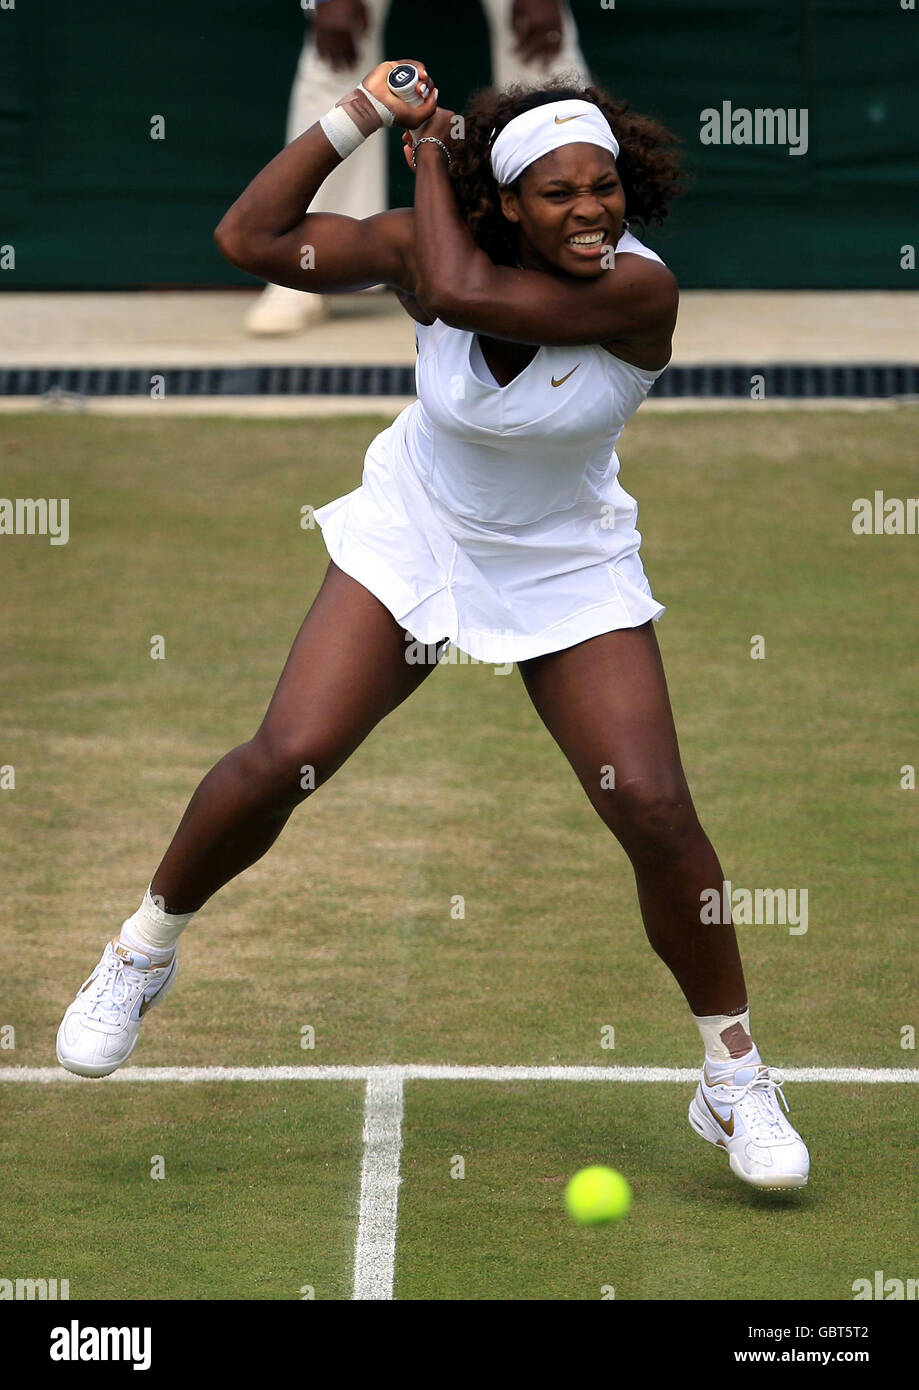 USA's Serena Williams in action against Italy's Roberta Vinci during the 2009 Wimbledon Championships at the All England Lawn Tennis and Croquet Club, Wimbledon, London. Stock Photo